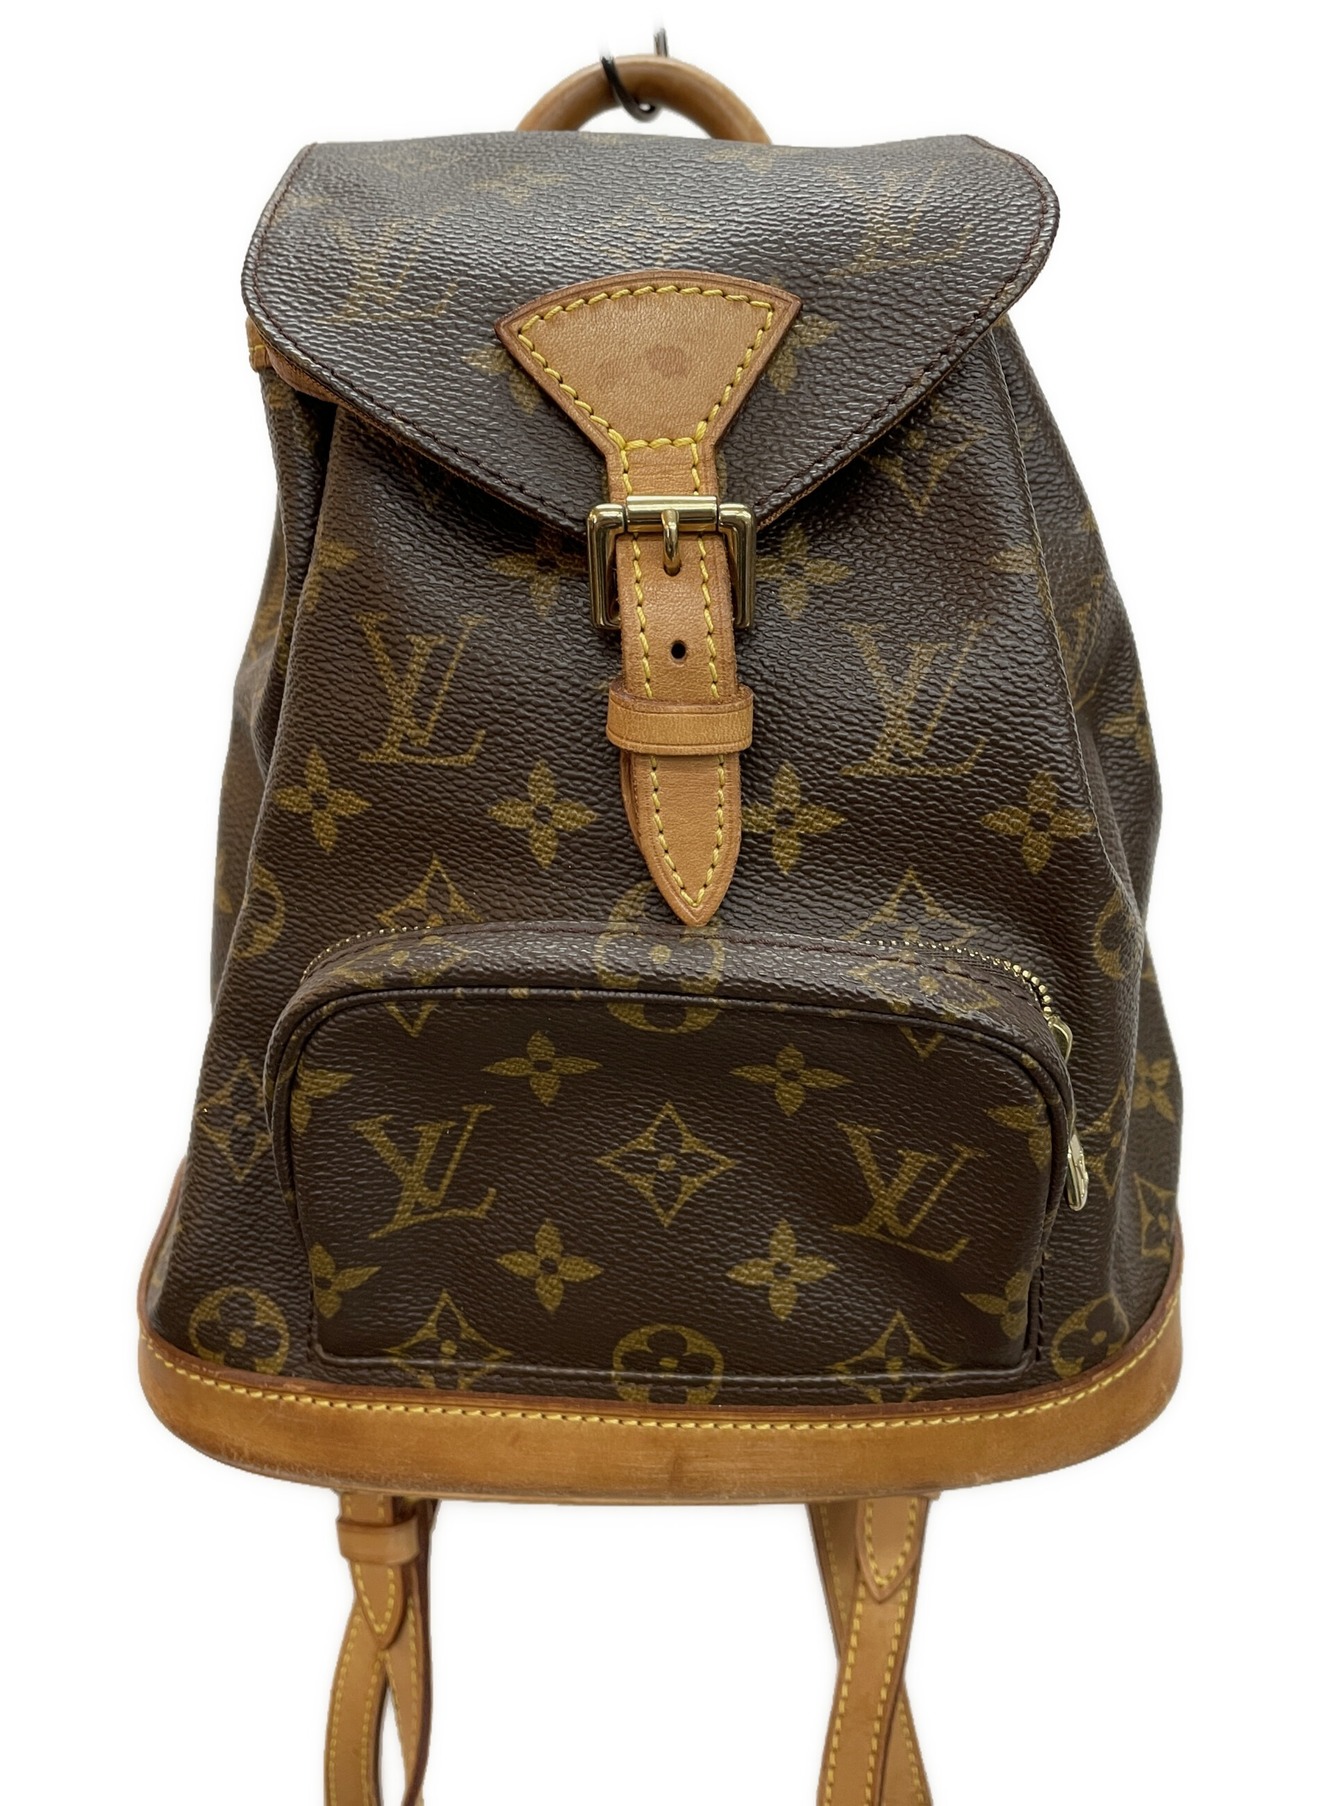 LOUIS VUITTON ルイヴィトン リュック